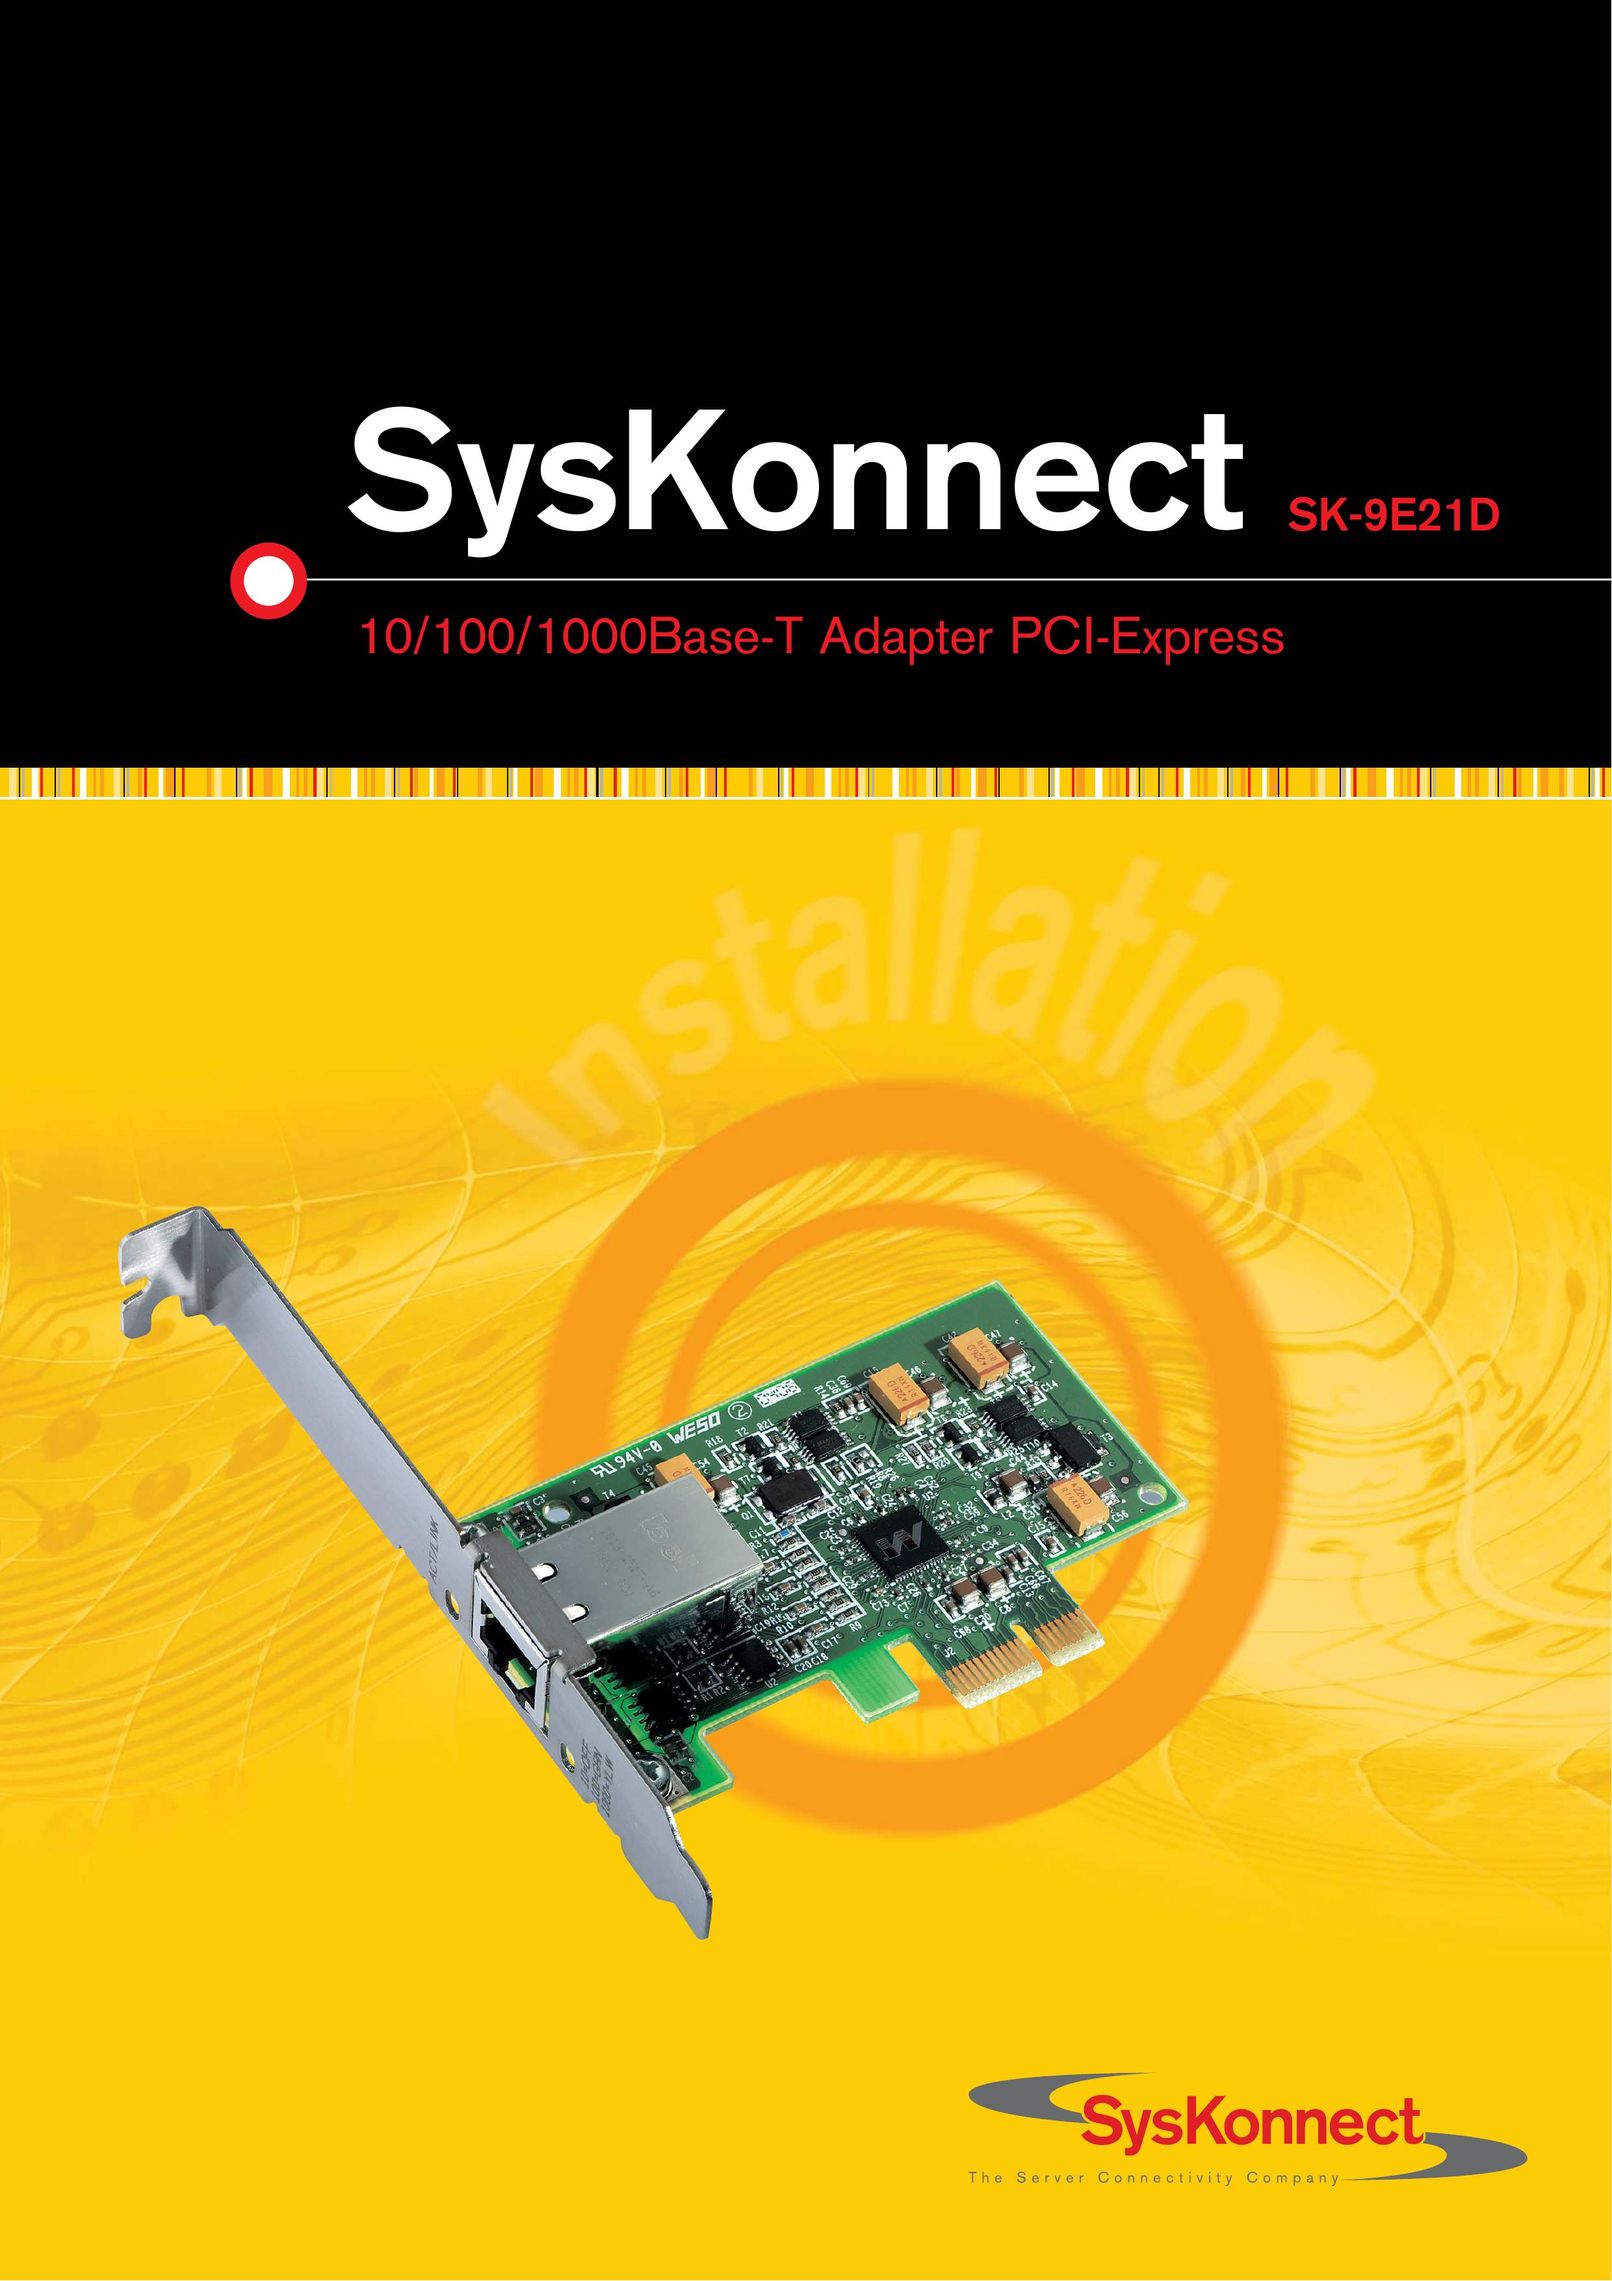 SysKonnect SK-9E21D Network Card User Manual